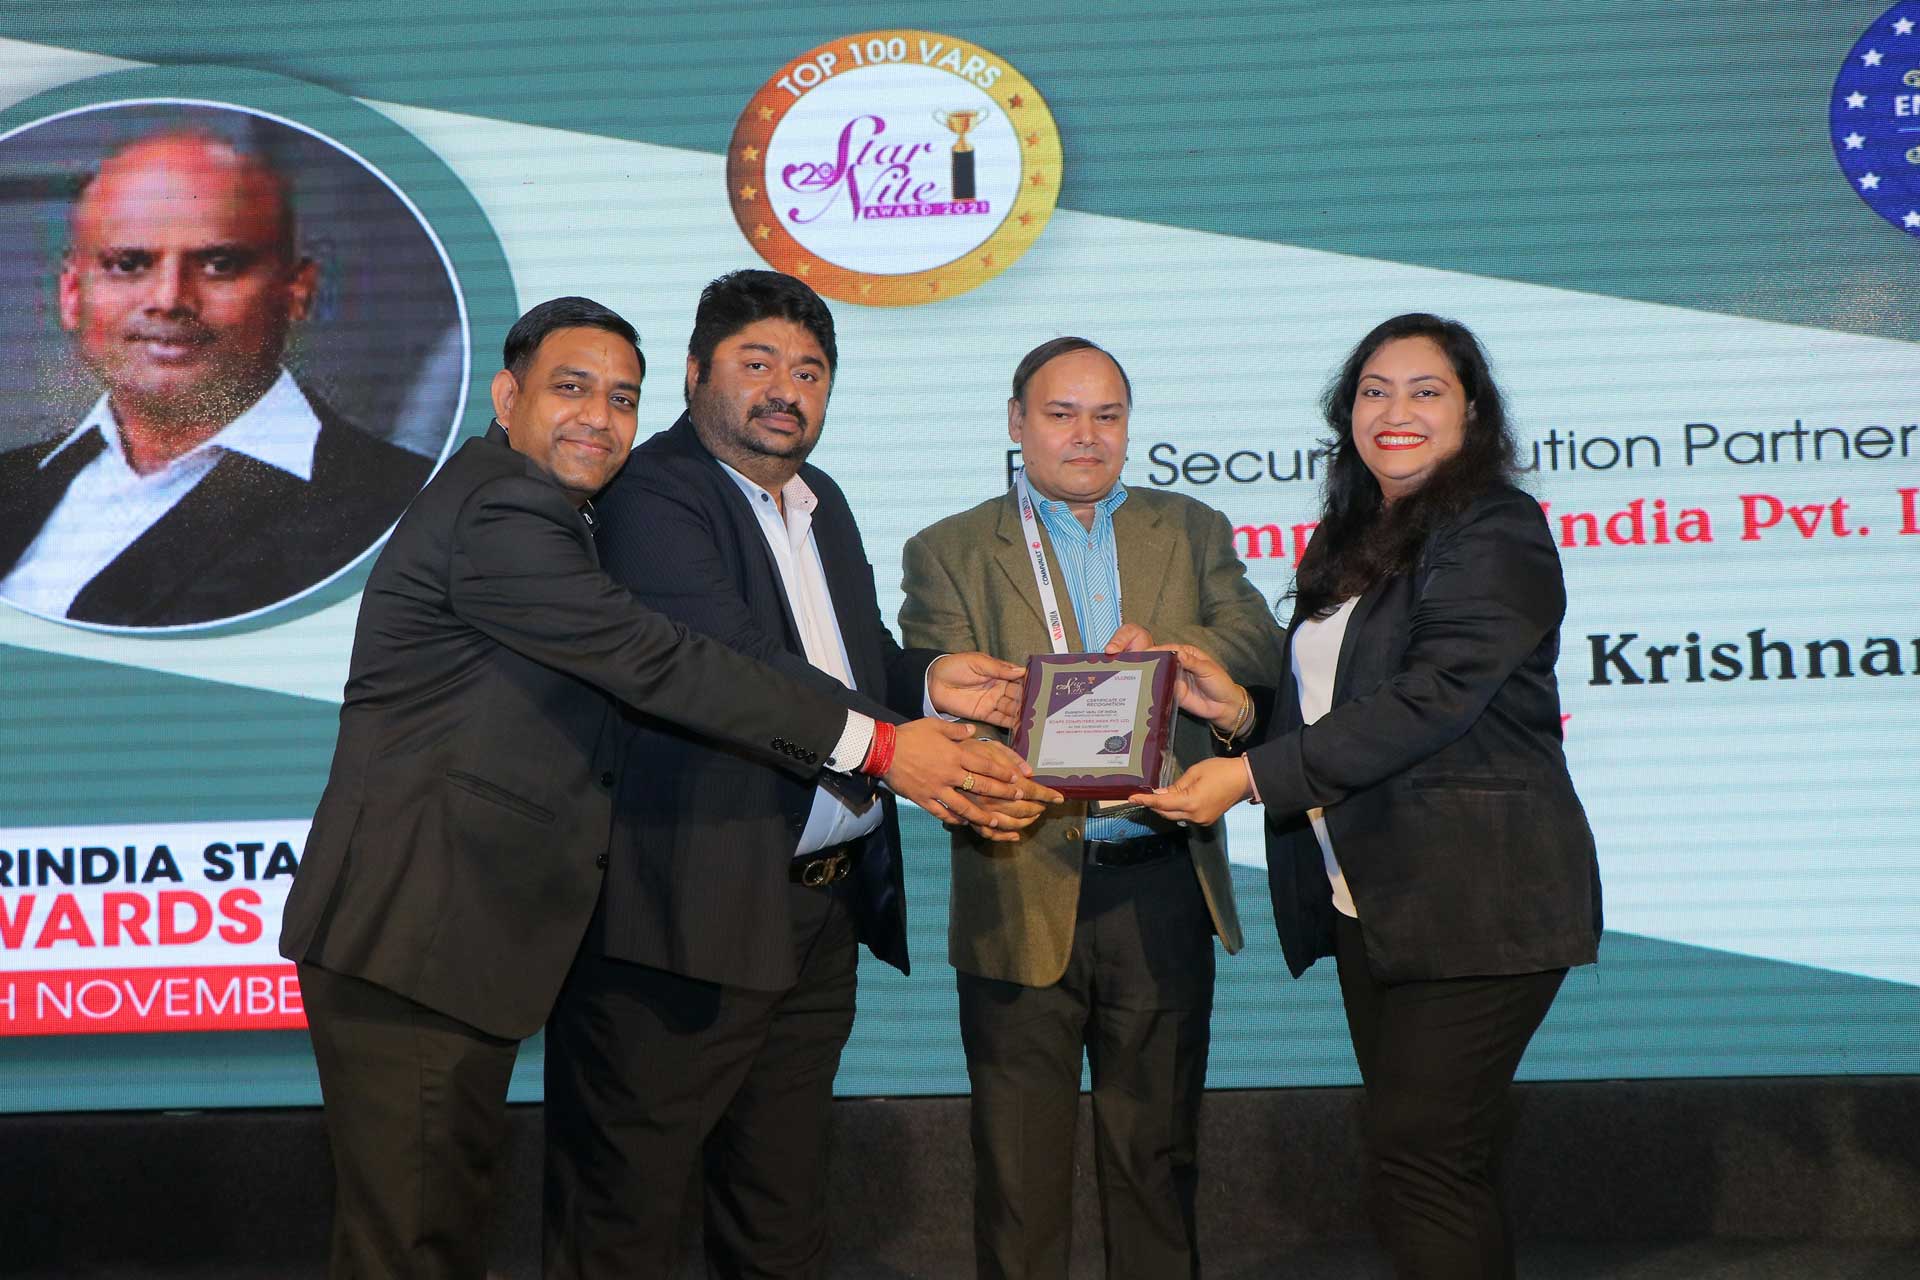 Best Security Solution Partner Award goes to eCaps Computers India Pvt. Ltd. at 20th Star Nite Award 2021